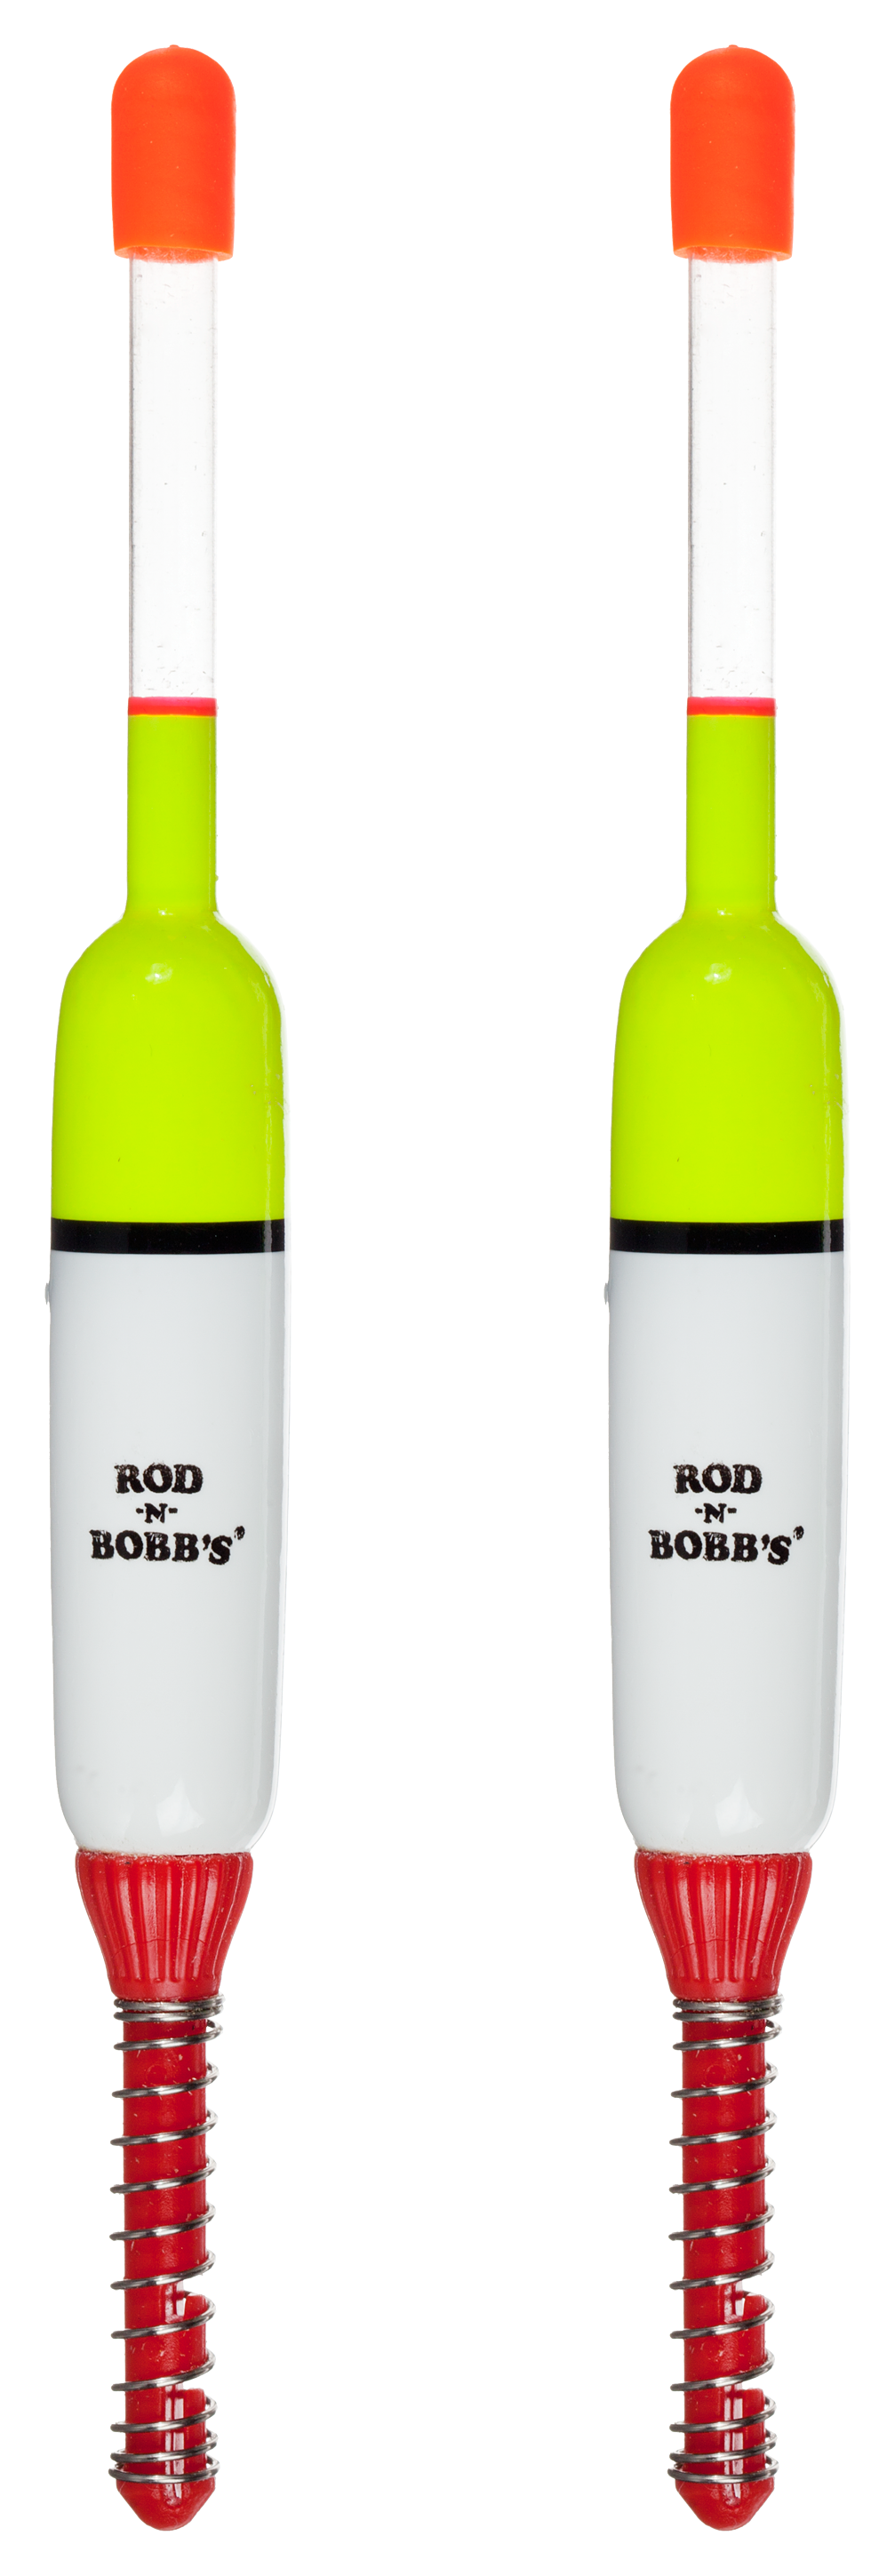 Rod-N-Bobb's Revolution x 3-in-one Weighted Bobber - 1